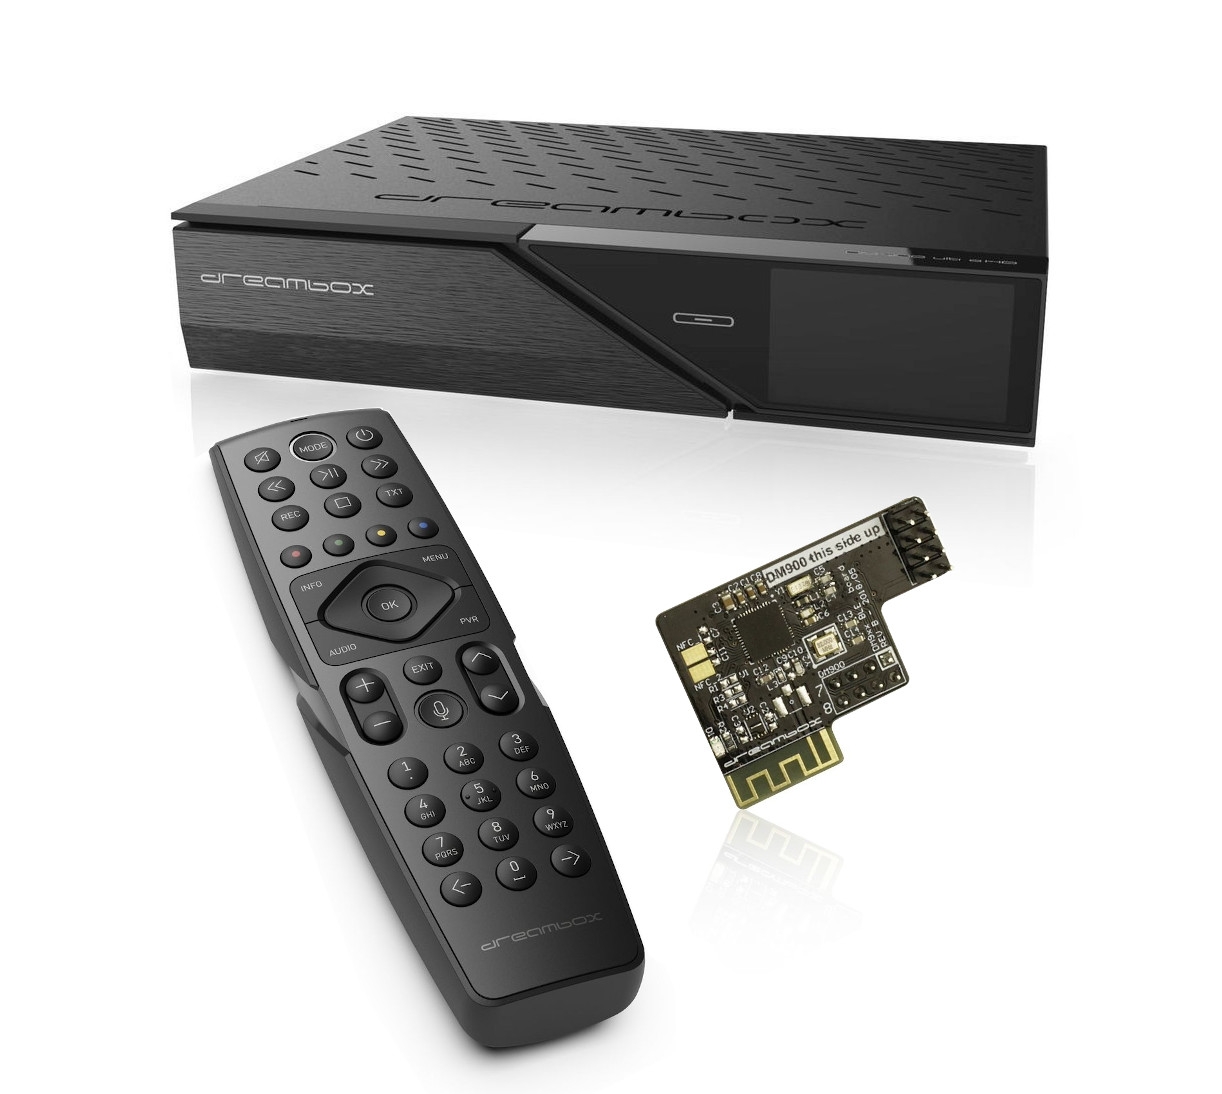 Dreambox DM900 BT UHD 4K 2x DVB-S2X / 1x DVB-C/T2 MS Triple Tuner 1 TB HDD E2 Linux Receiver